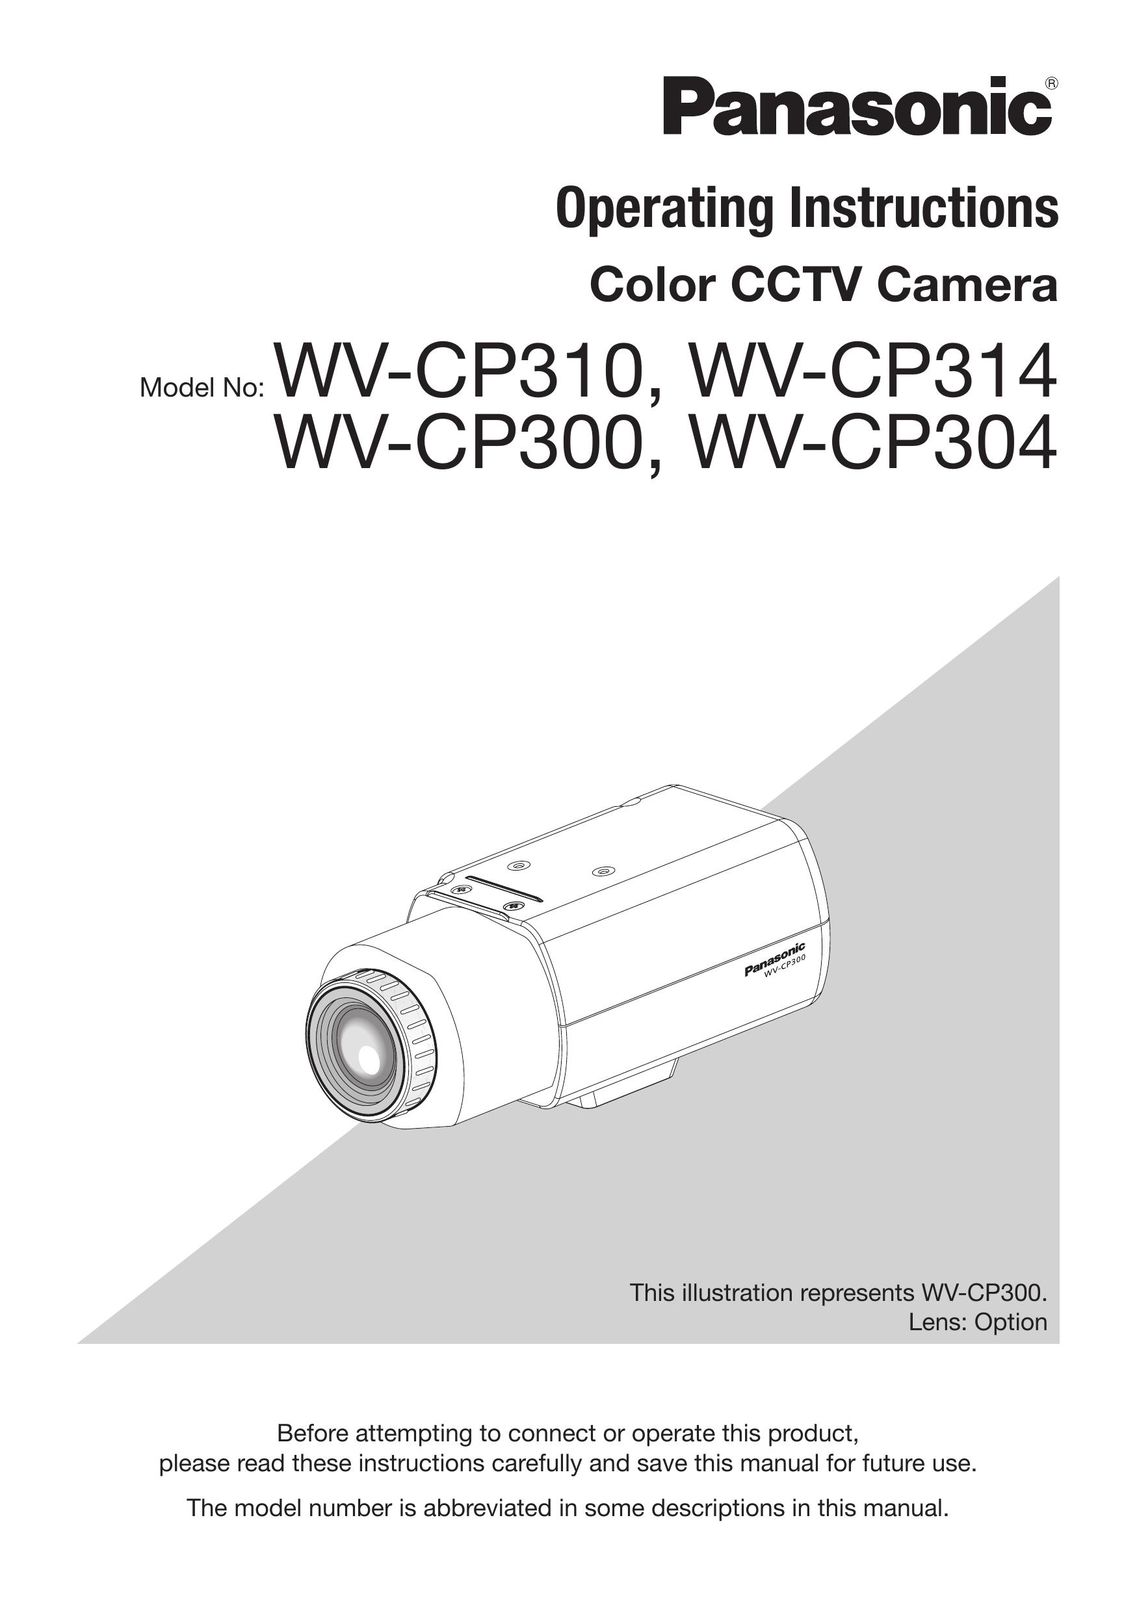 Panasonic WV-CP304 Home Security System User Manual